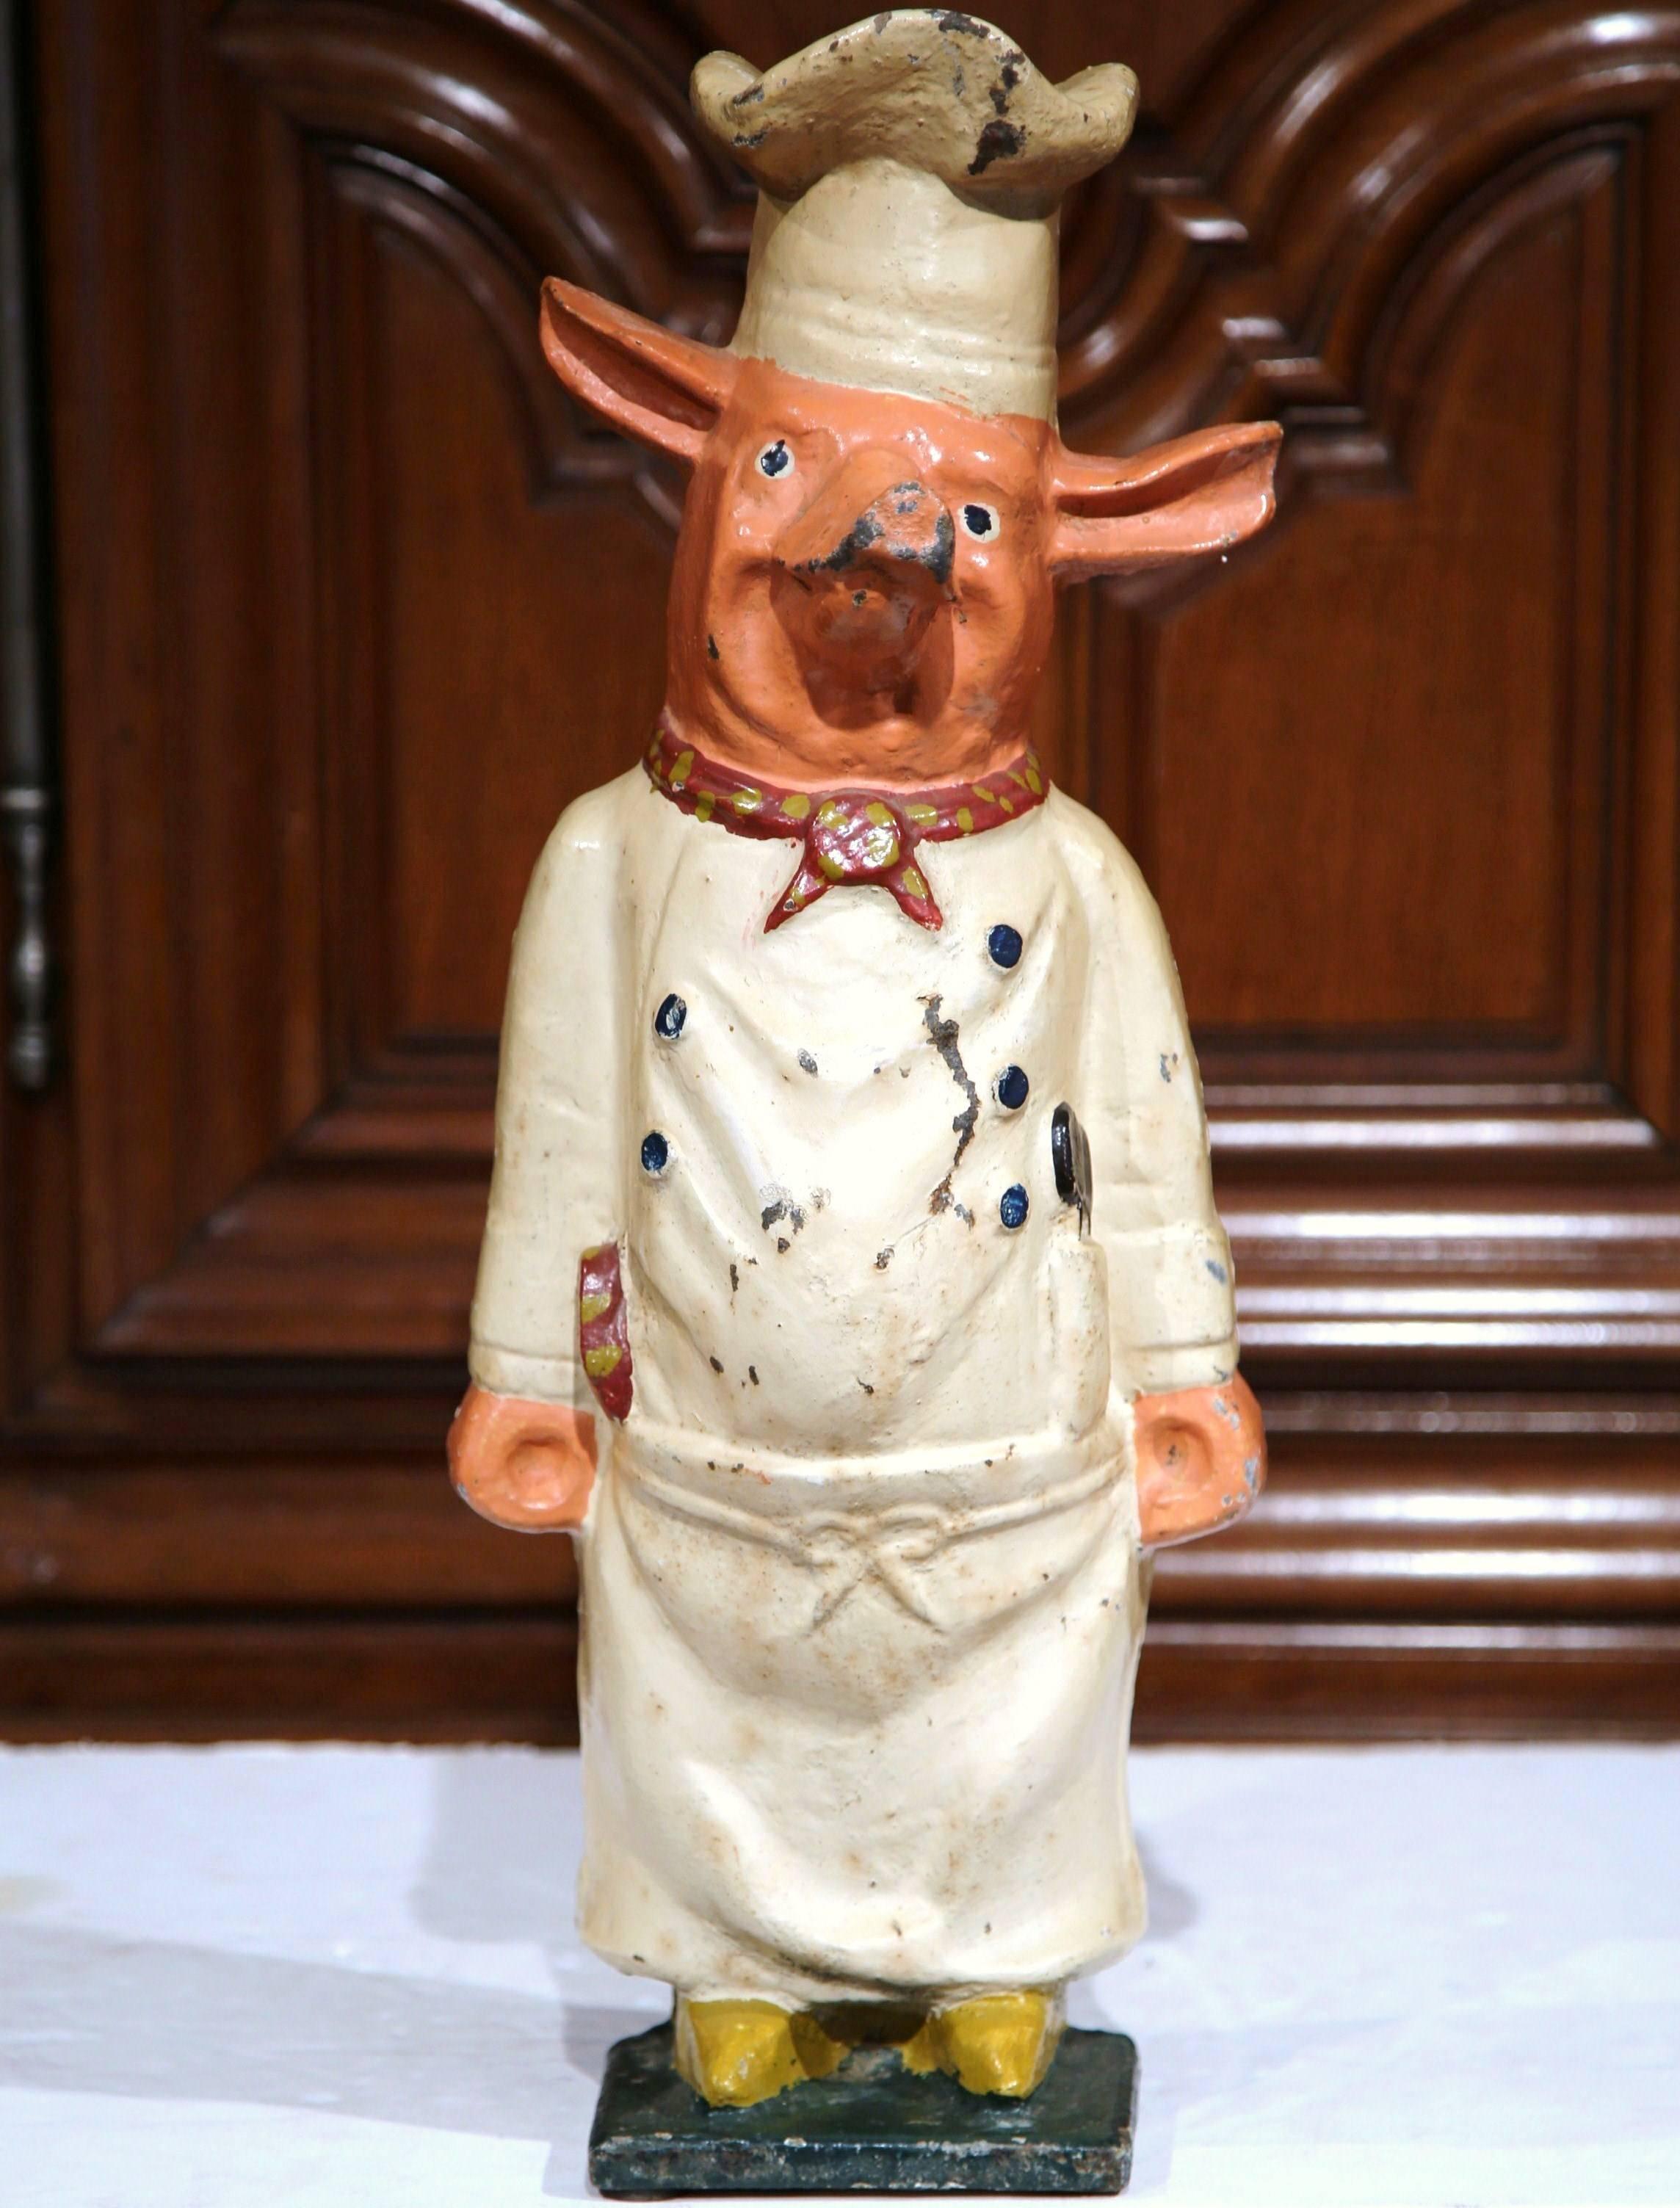 Add character to your kitchen with this playful cast iron pig statue from France, circa 1900. This hand-painted standing sculpture was found in a Paris restaurant and depicts a pig wearing a Classic chef's uniform. The piece is in excellent